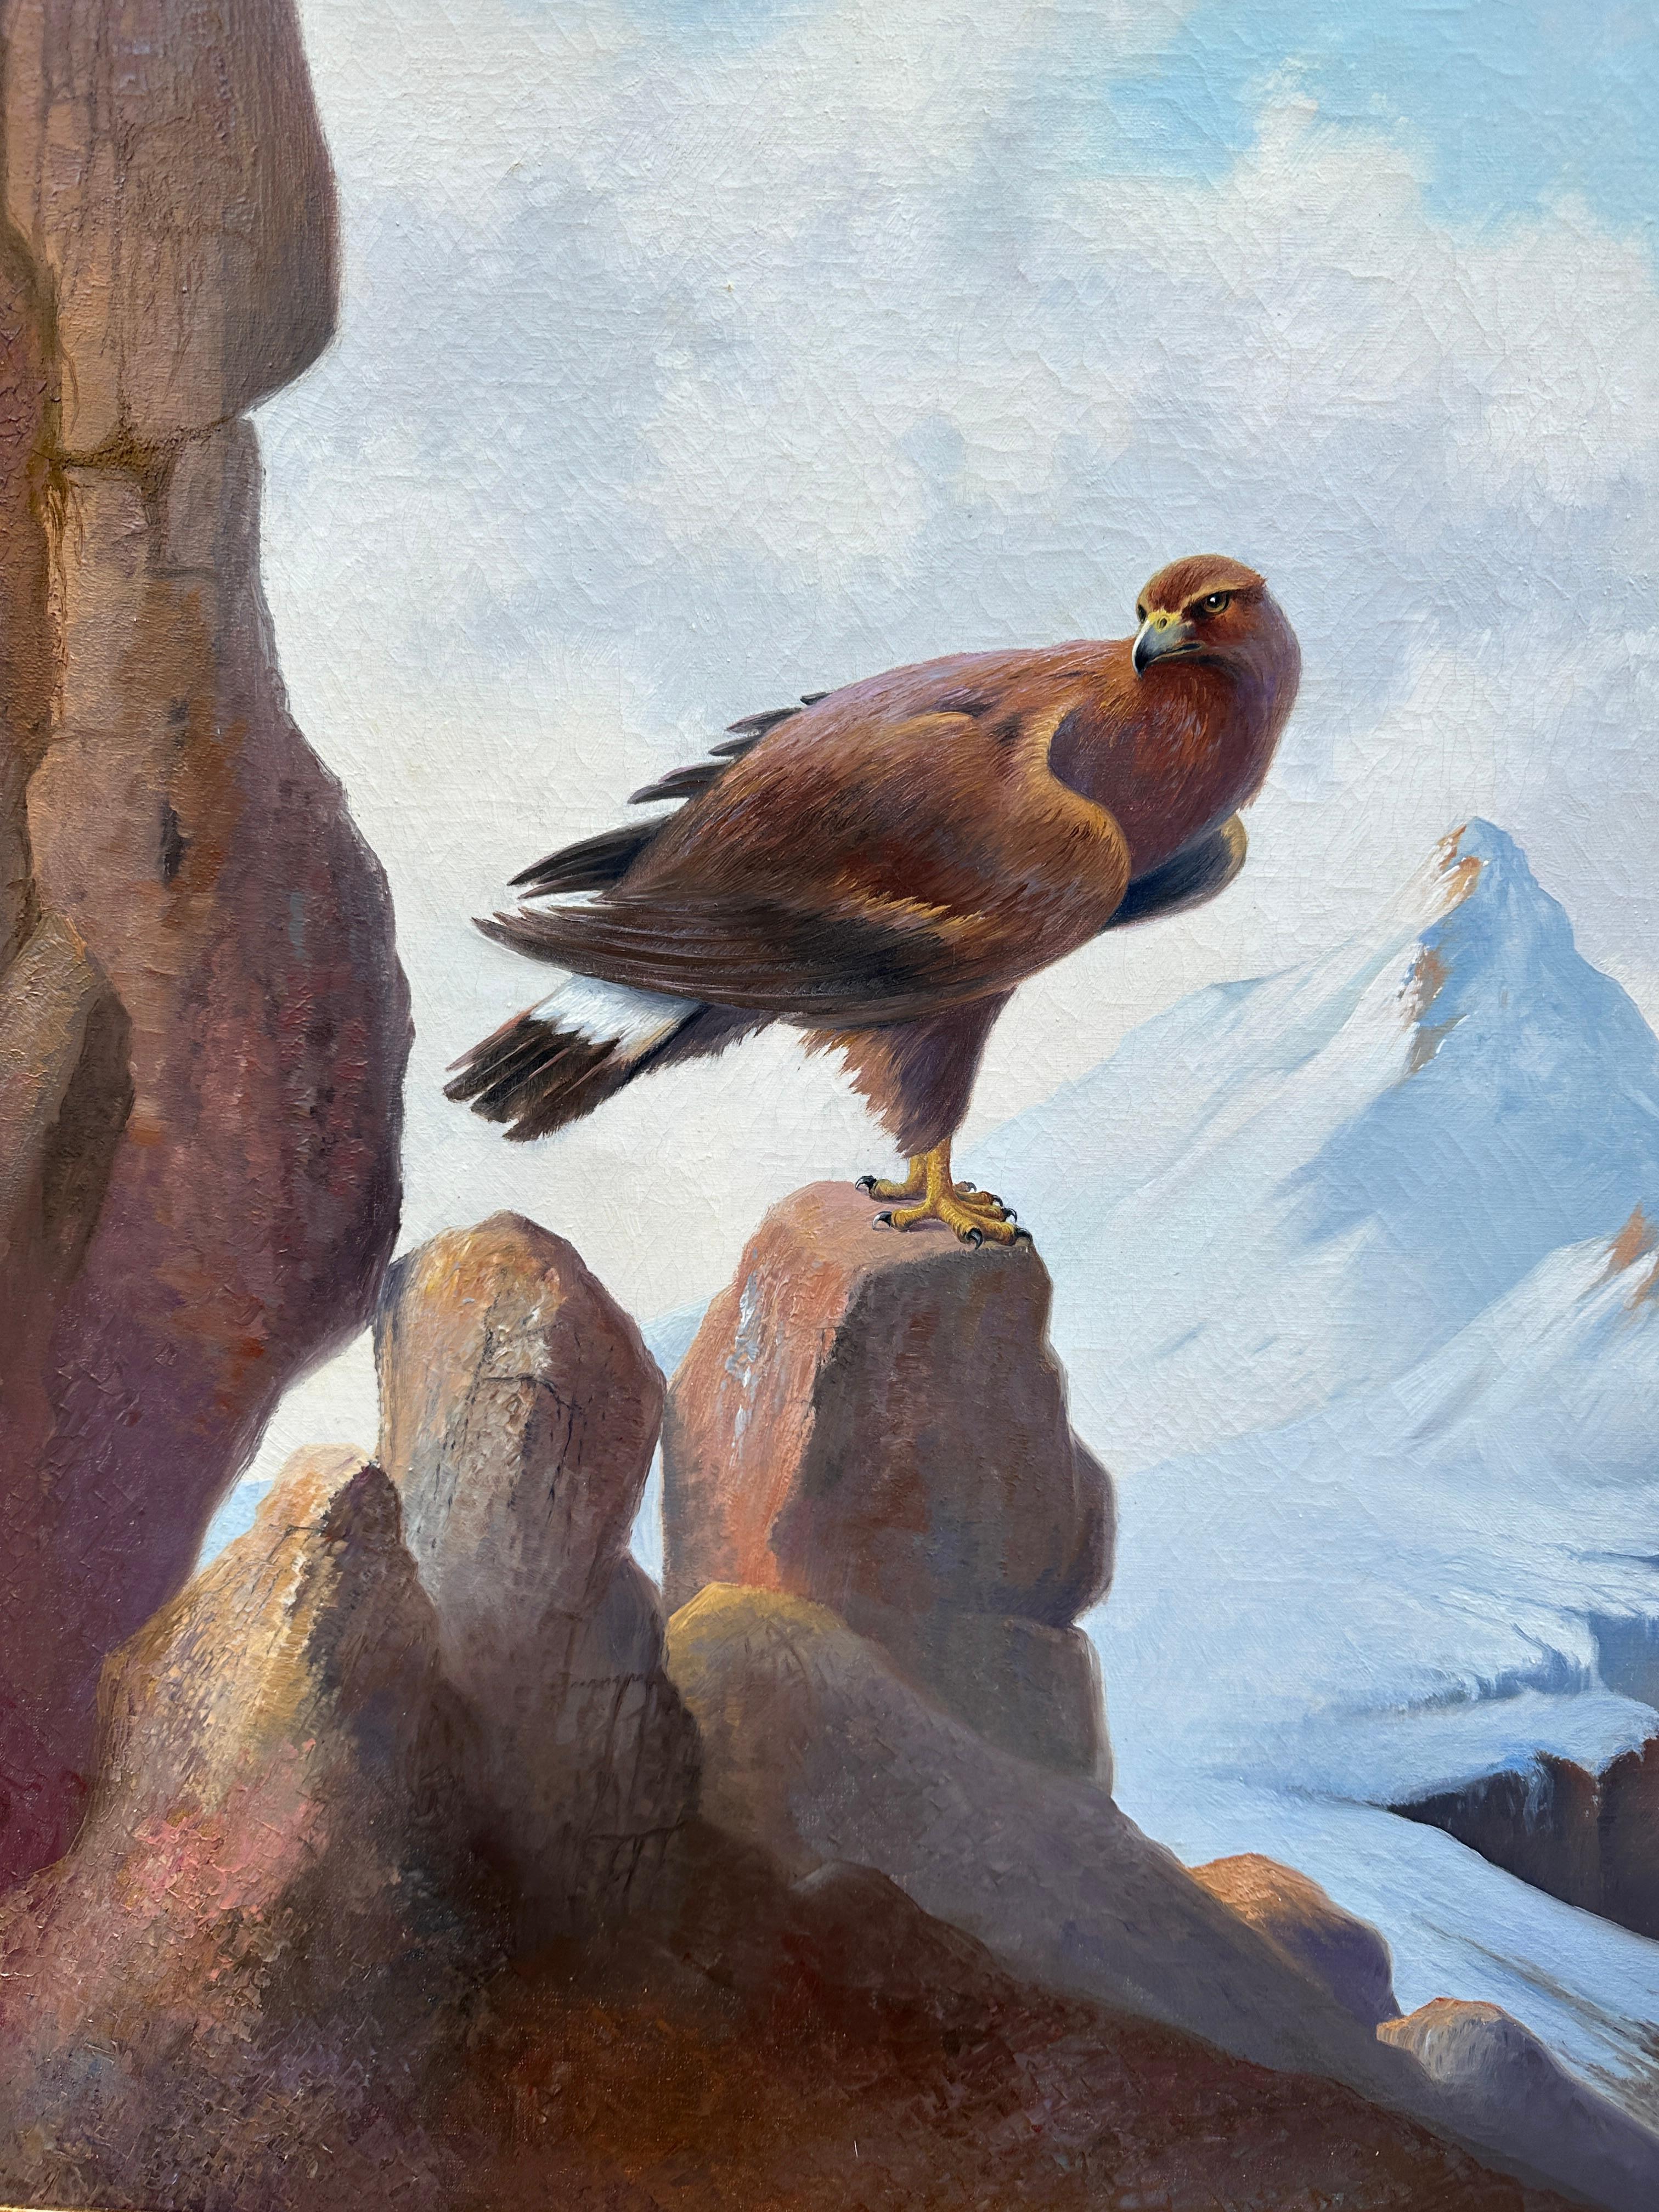 Portrait In a Mountain landscape of a standing Eagle, in the Alps.

Bauer painted animals often running , flying or standing in their natural setting. Always with a great deal of quality his paintings are highly sought after.

A painting by K. A.